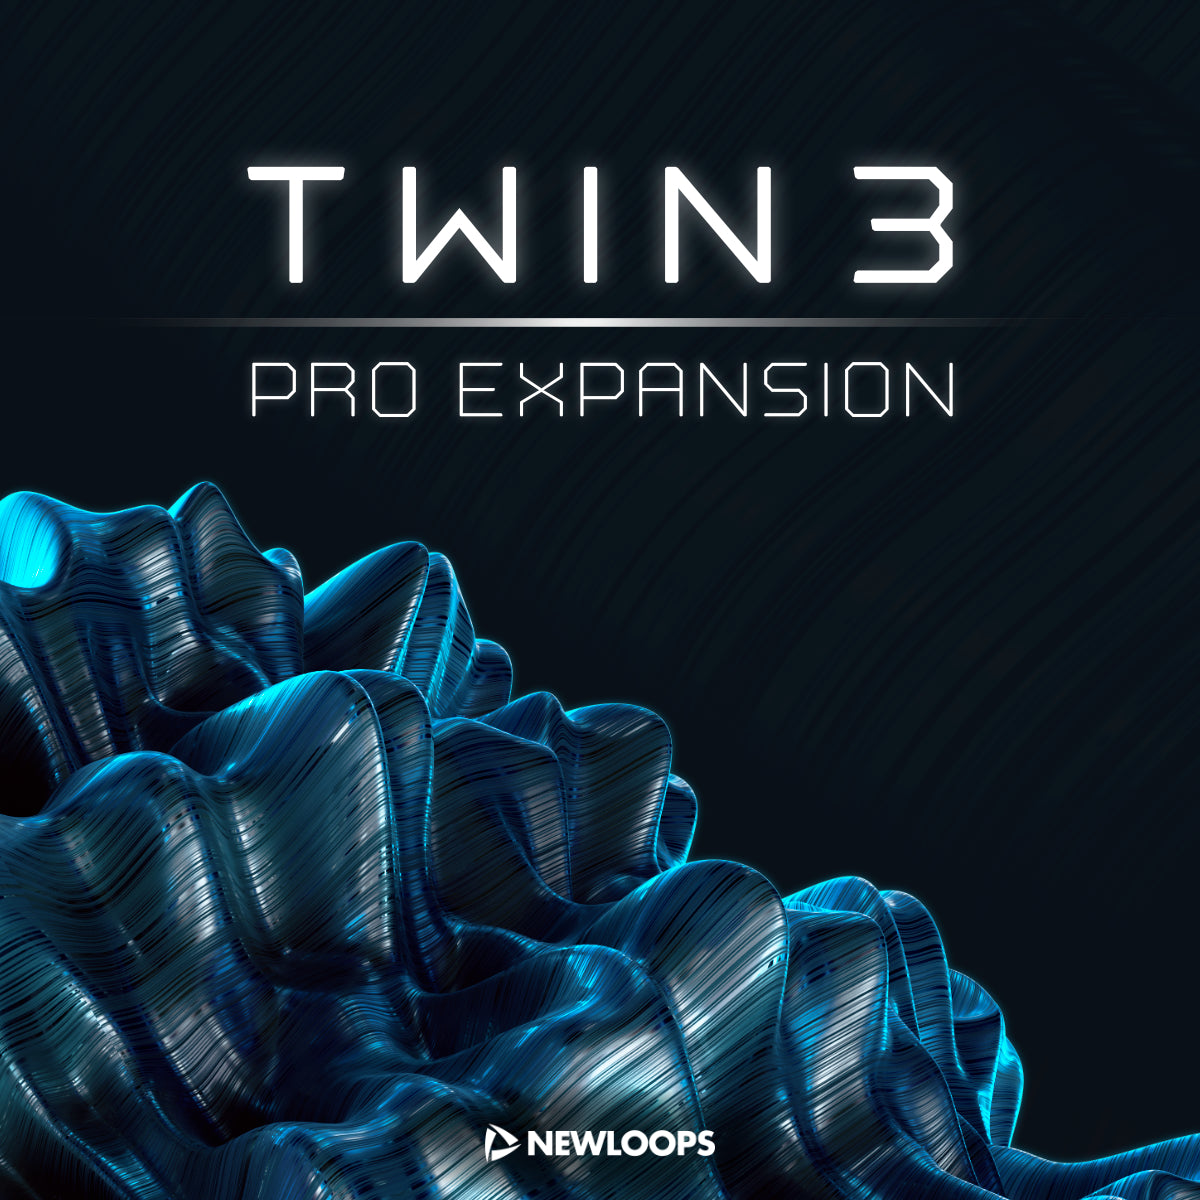 Twin 3 Pro Expansion - Twin 3 Presets